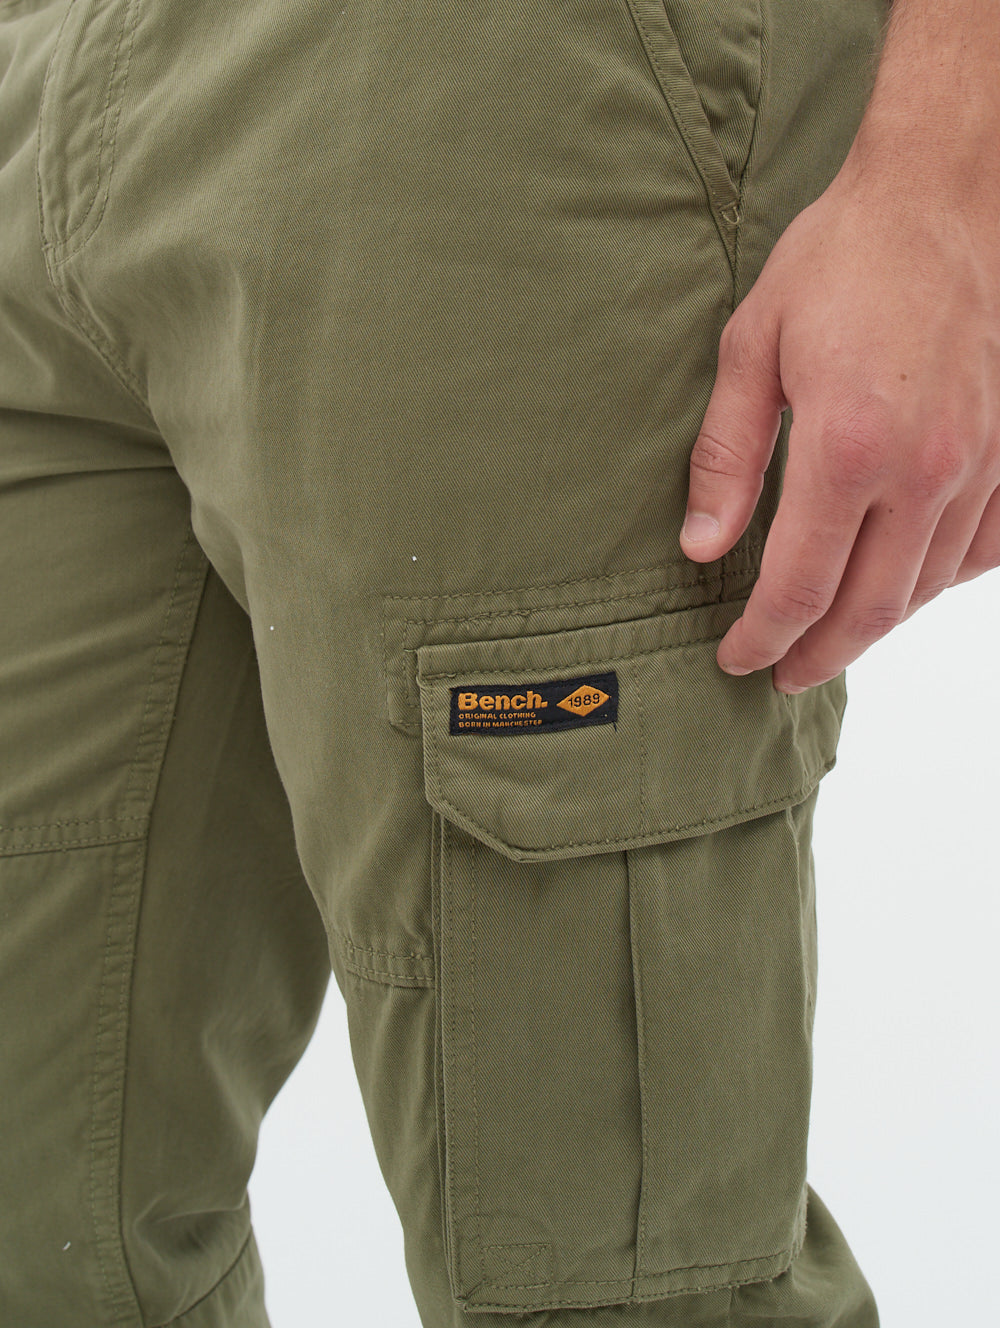 Dickies Twill Cargo Mens Pants Olive WP595MS – Shoe Palace